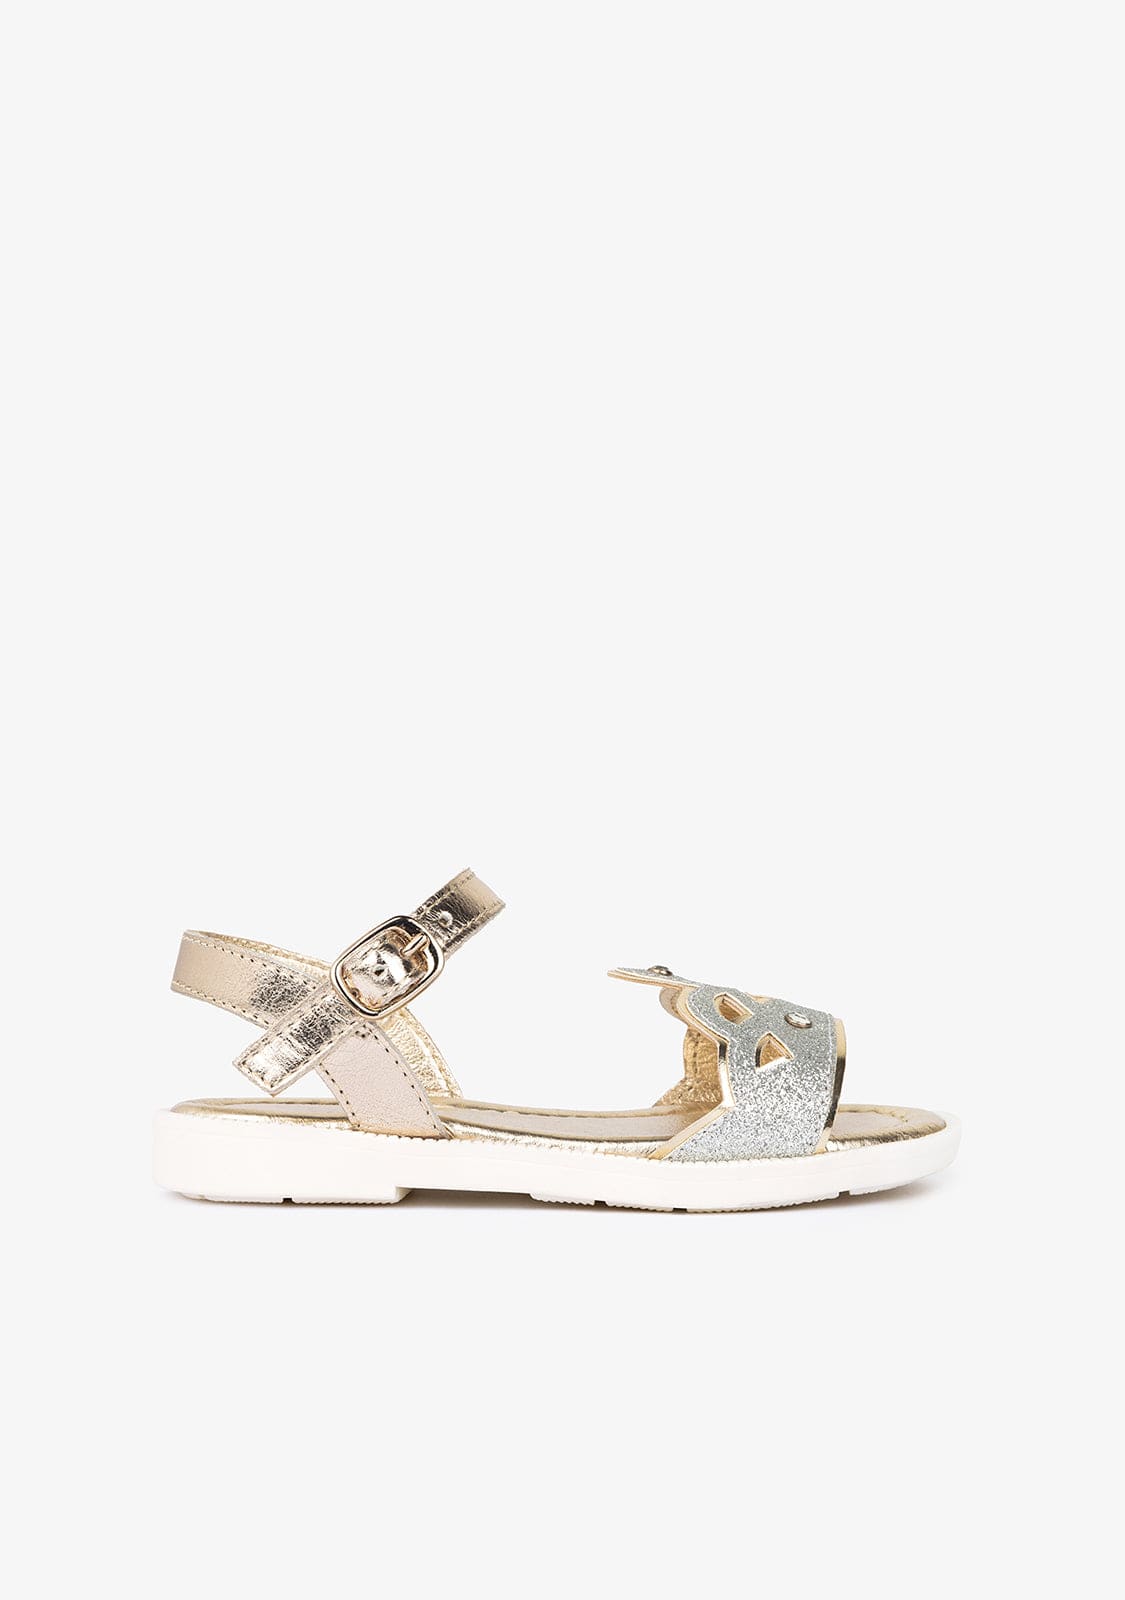 CONGUITOS Shoes Girl's Crown Silver Leather Sandals